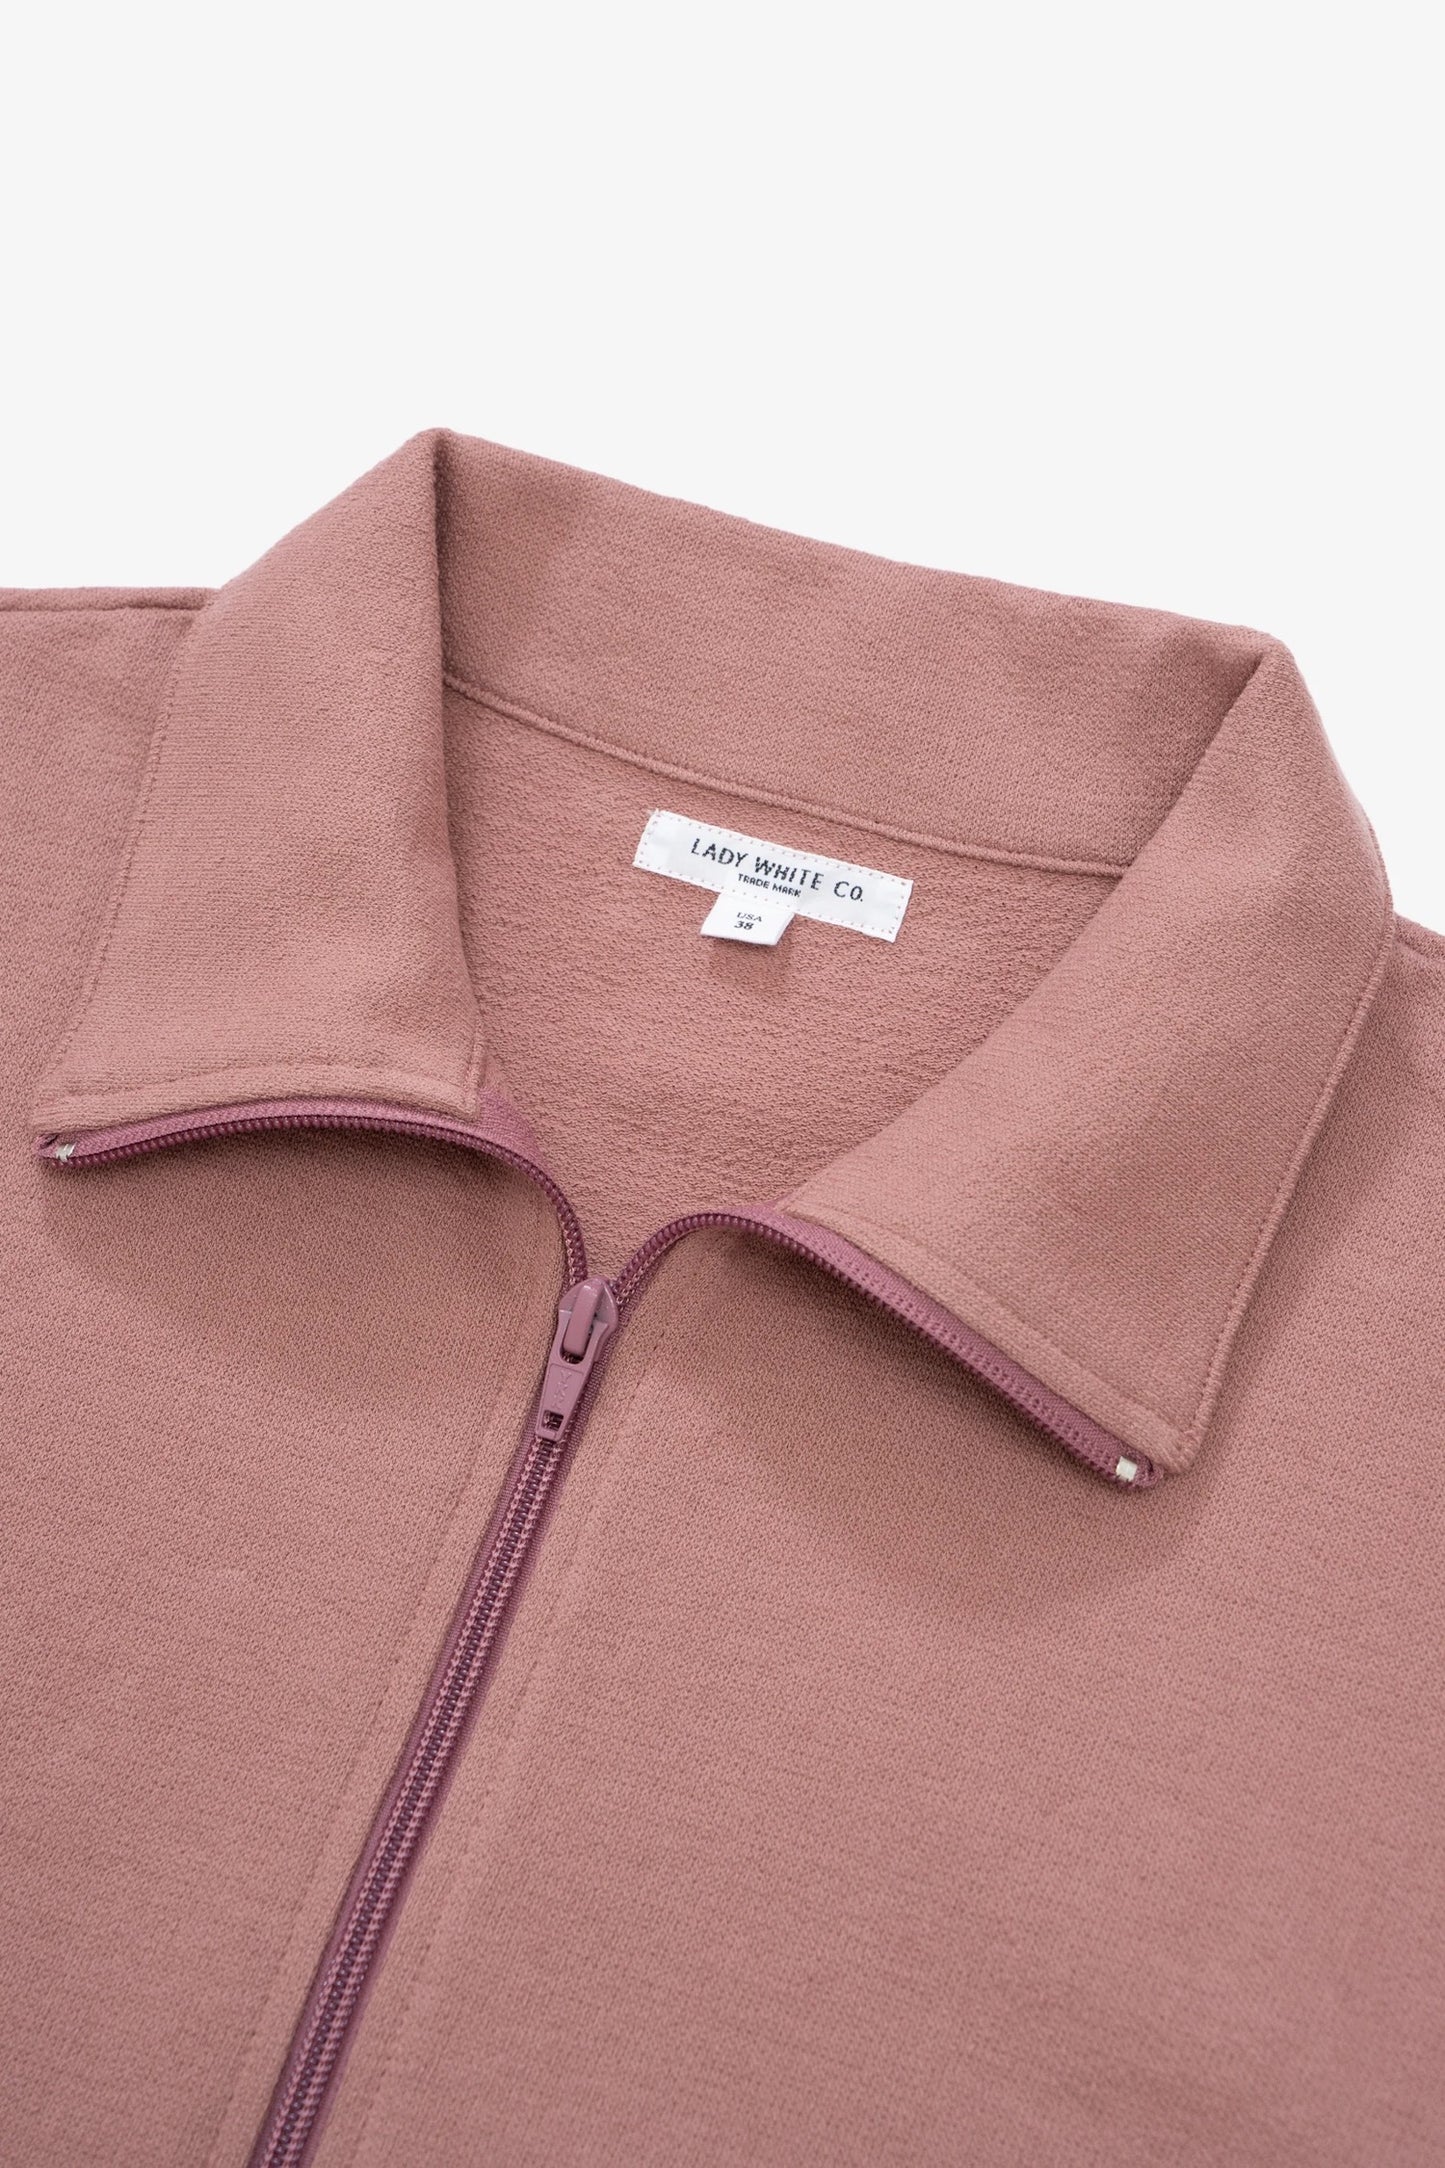 LADY WHITE CO. TEXTURED FULL ZIP - DEEP MAUVE